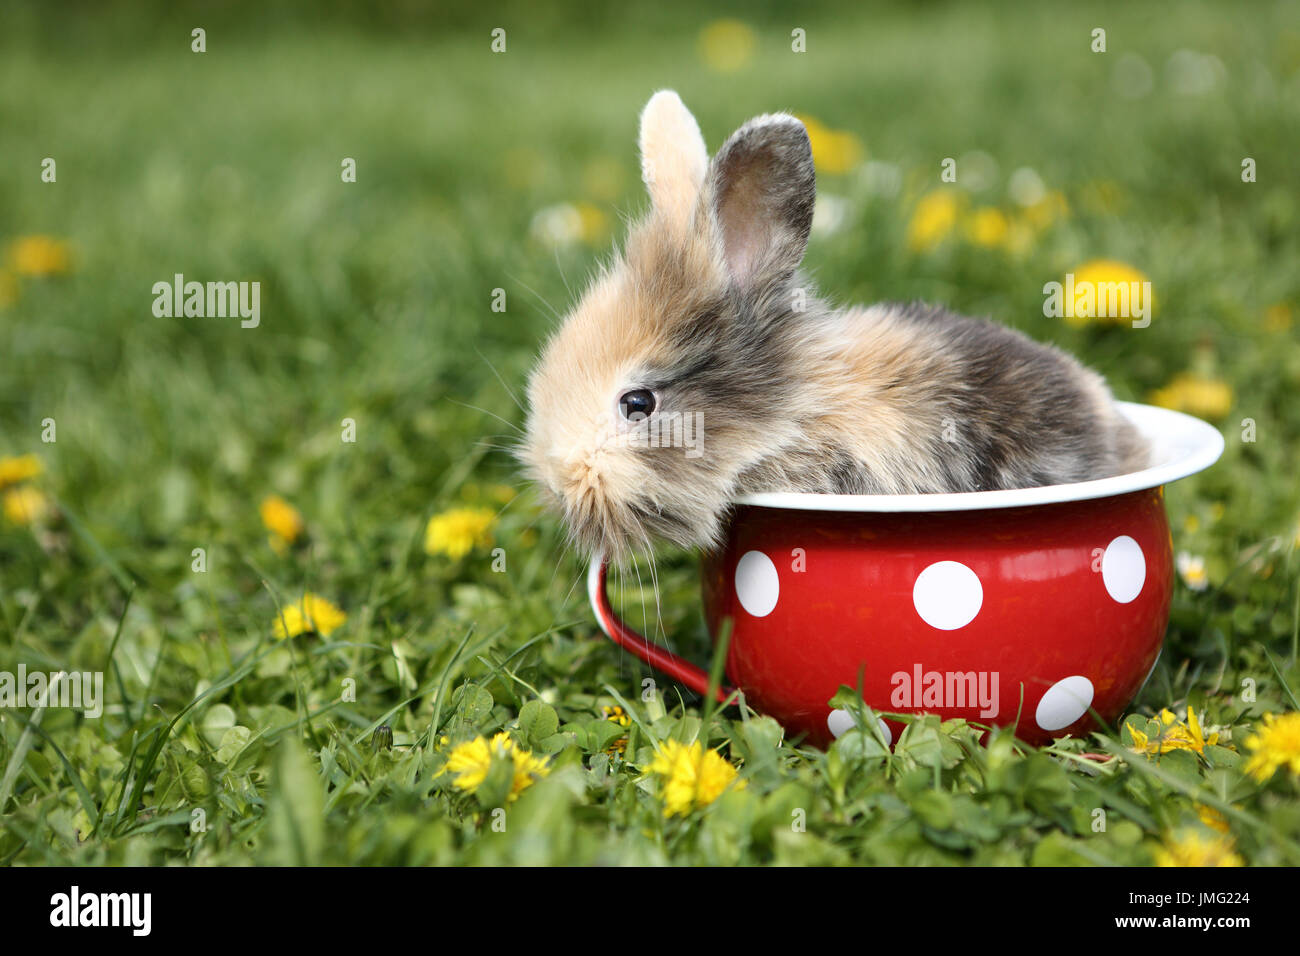 Dwarf Rabbit. Young in a red chamber pot with white polka dots, in a flowering meadow. Germany Stock Photo